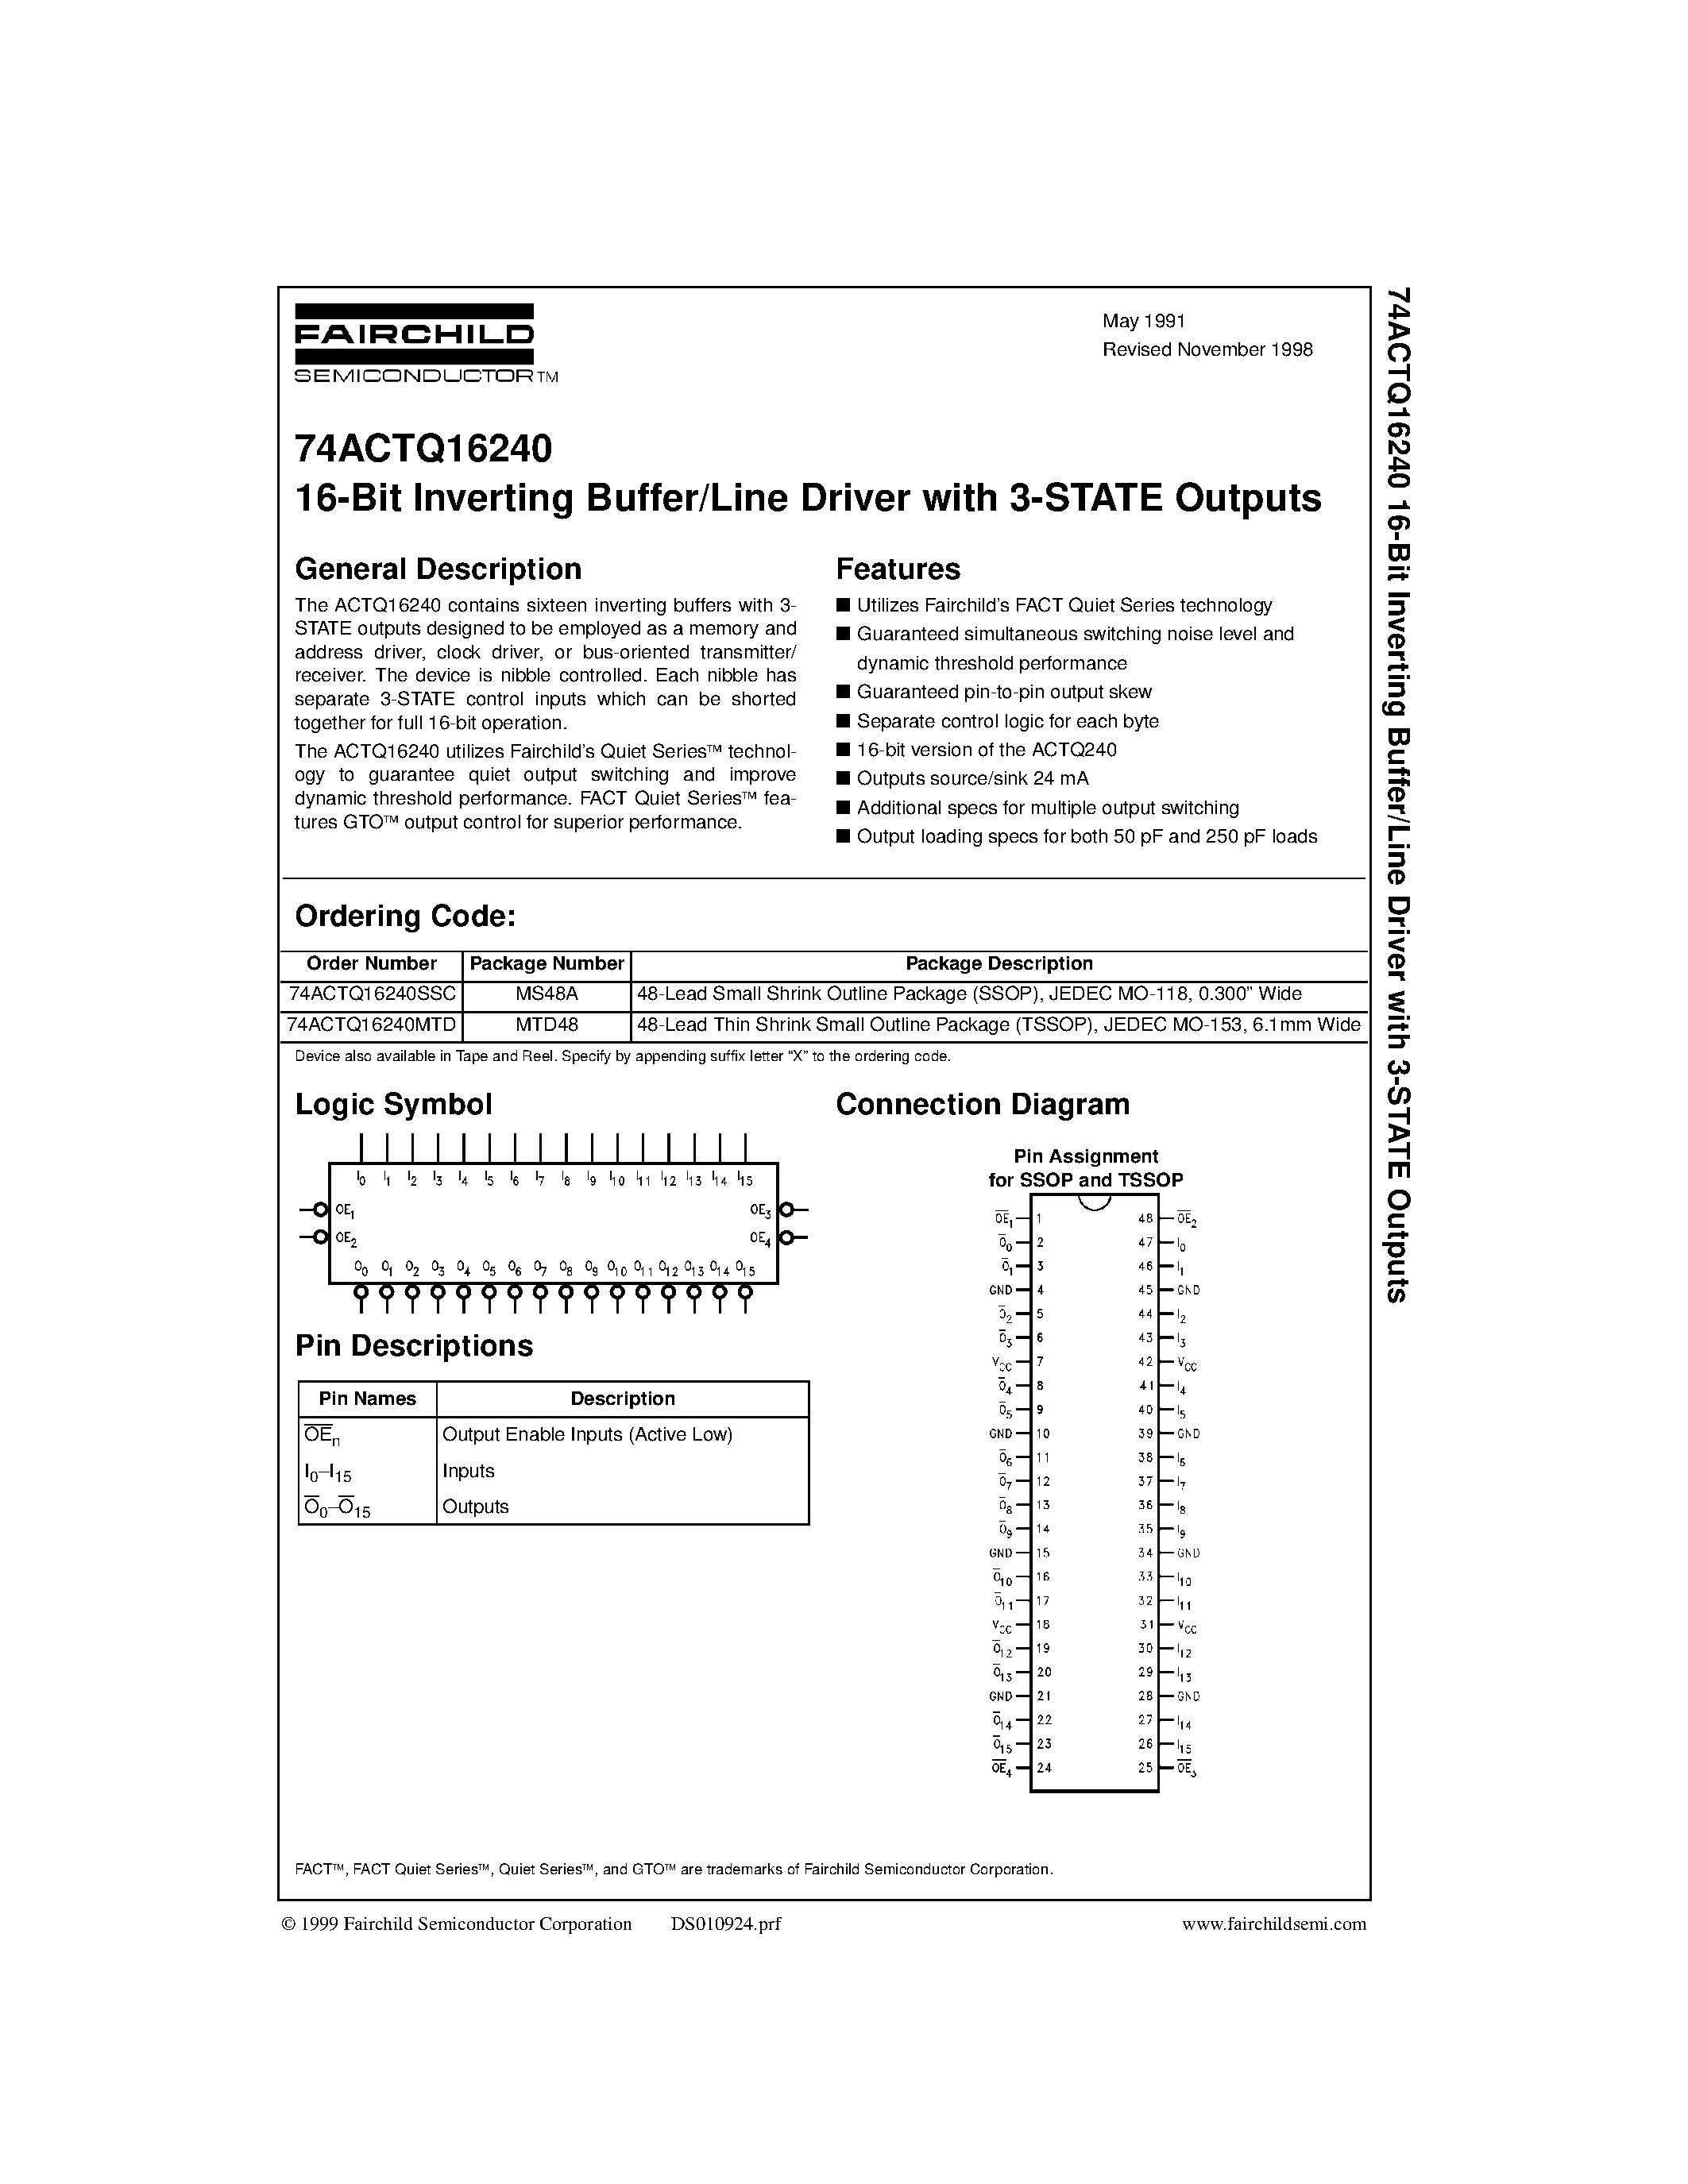 Datasheet 74ACTQ16240SSC - 16-Bit Inverting Buffer/Line Driver with 3-STATE Outputs page 1